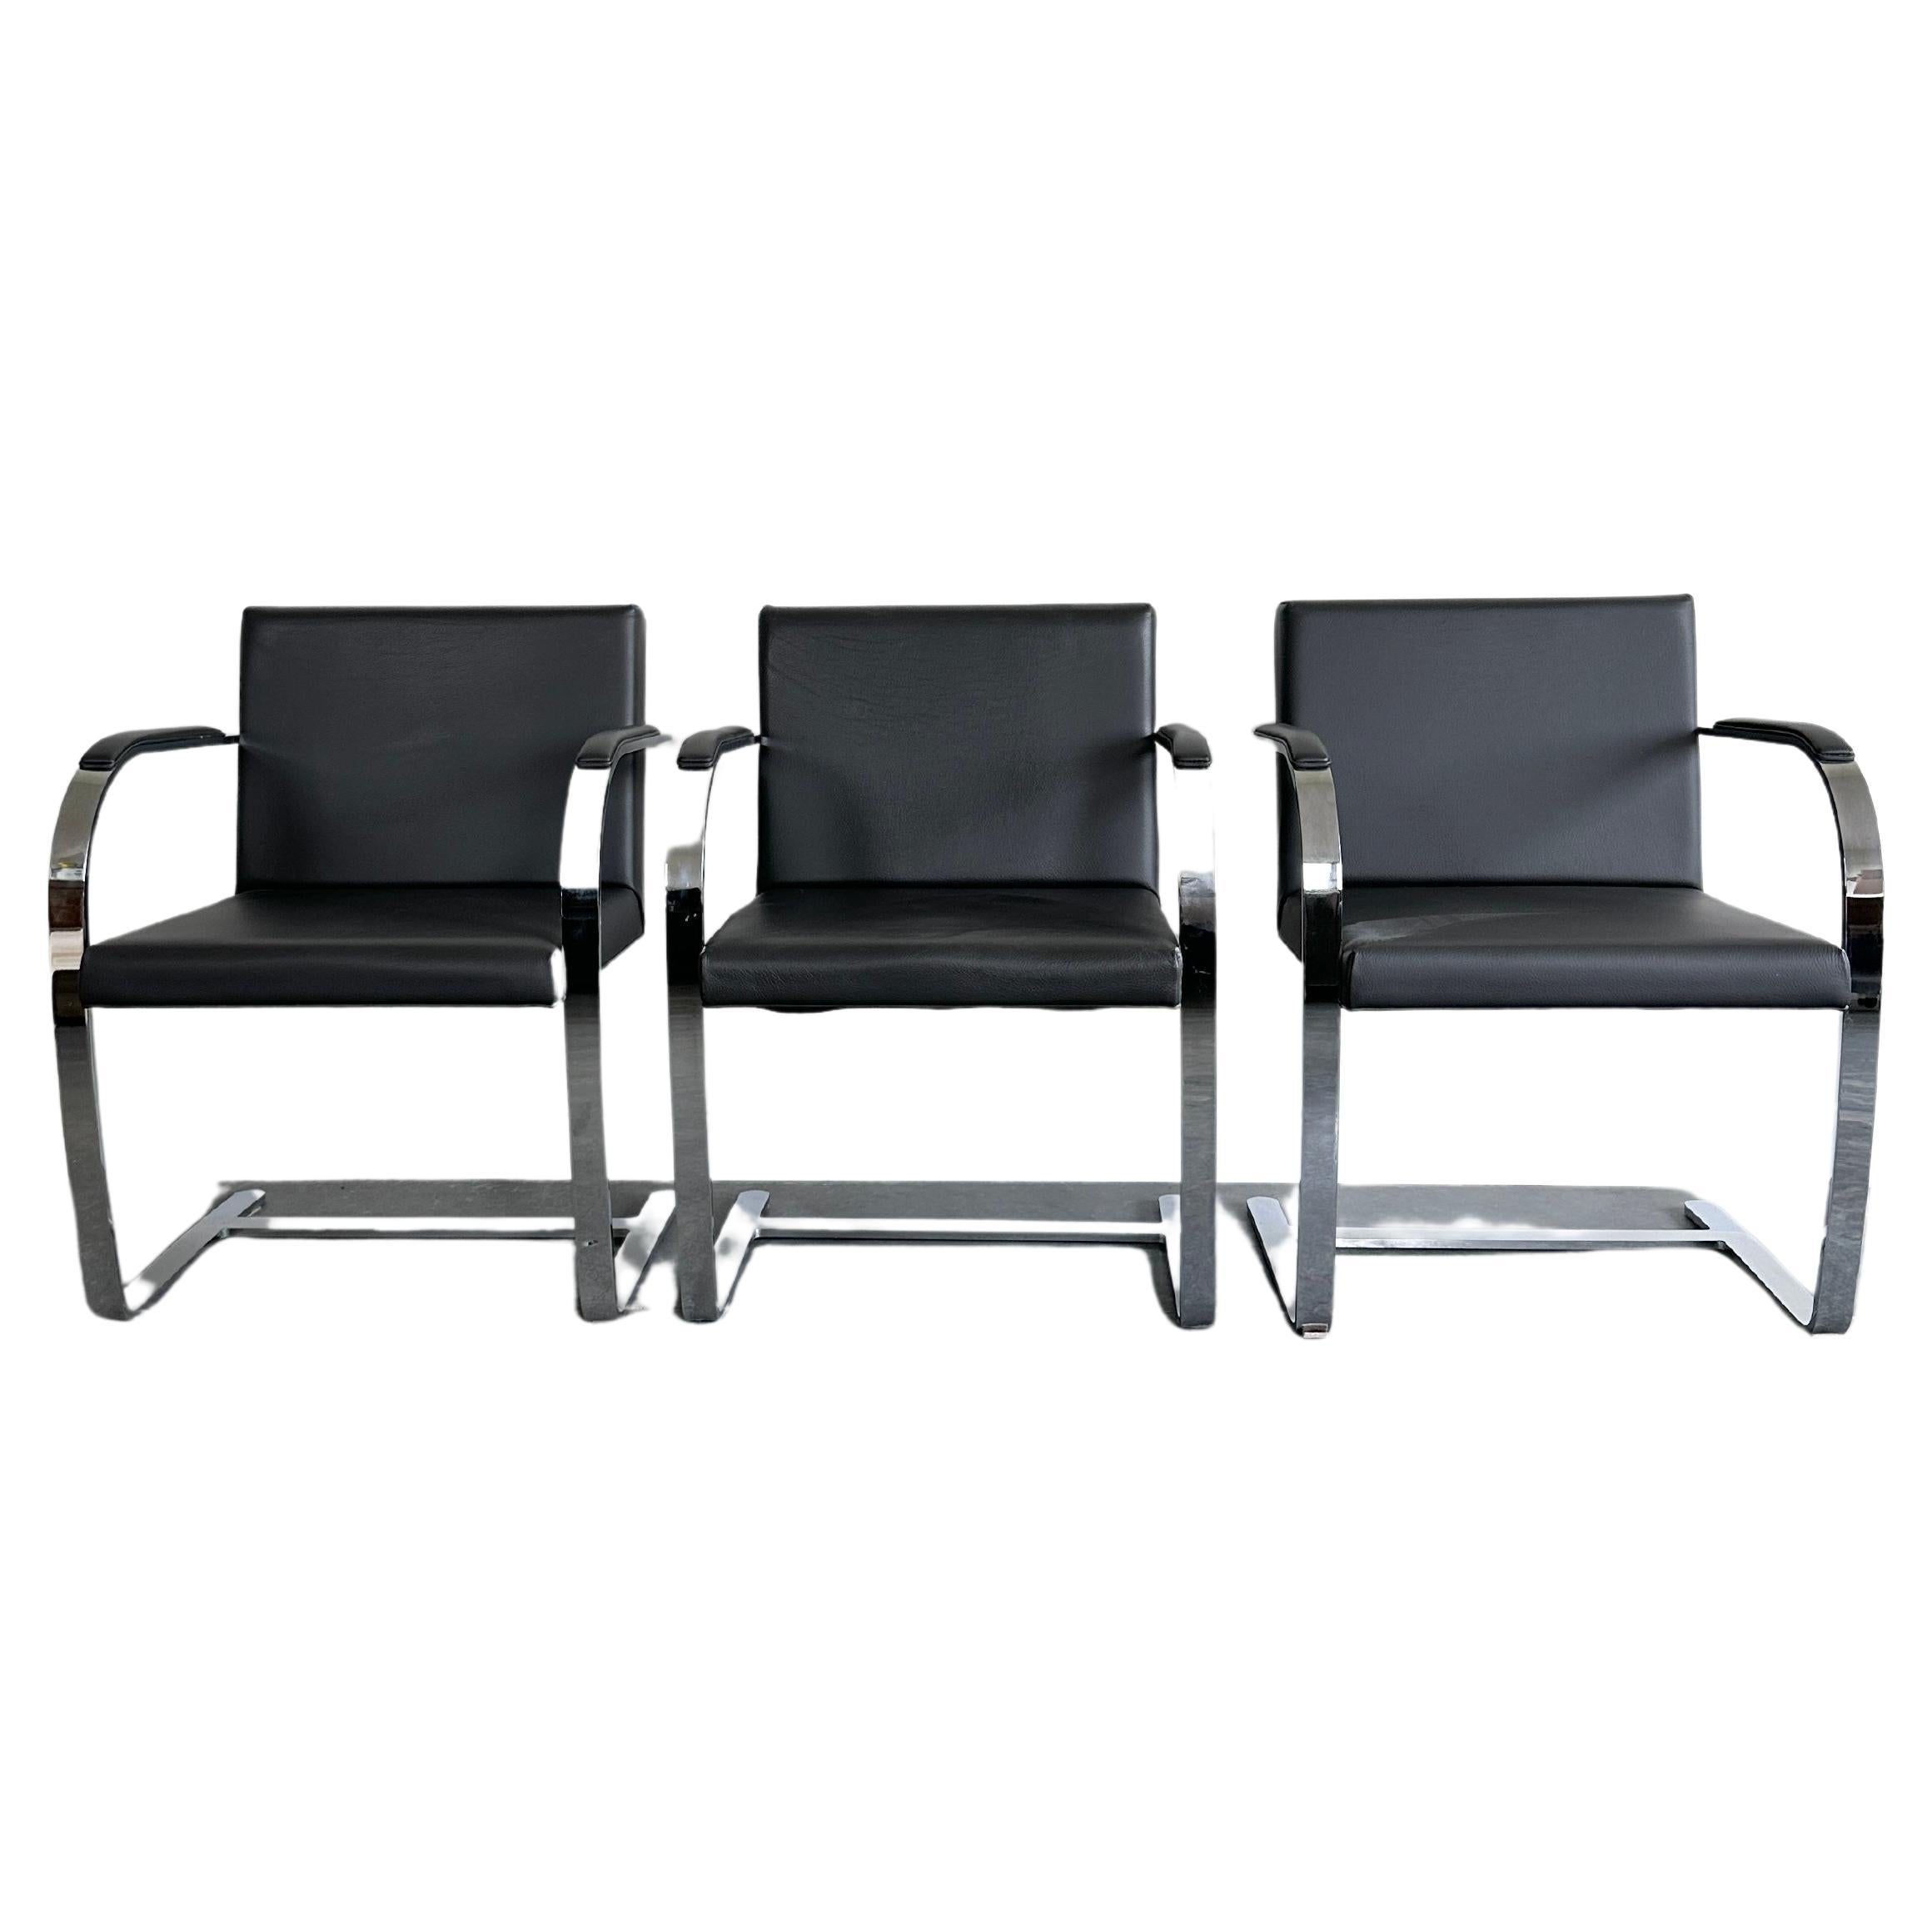 Flat Bar Brno model 255 chairs in charcoal leather For Sale